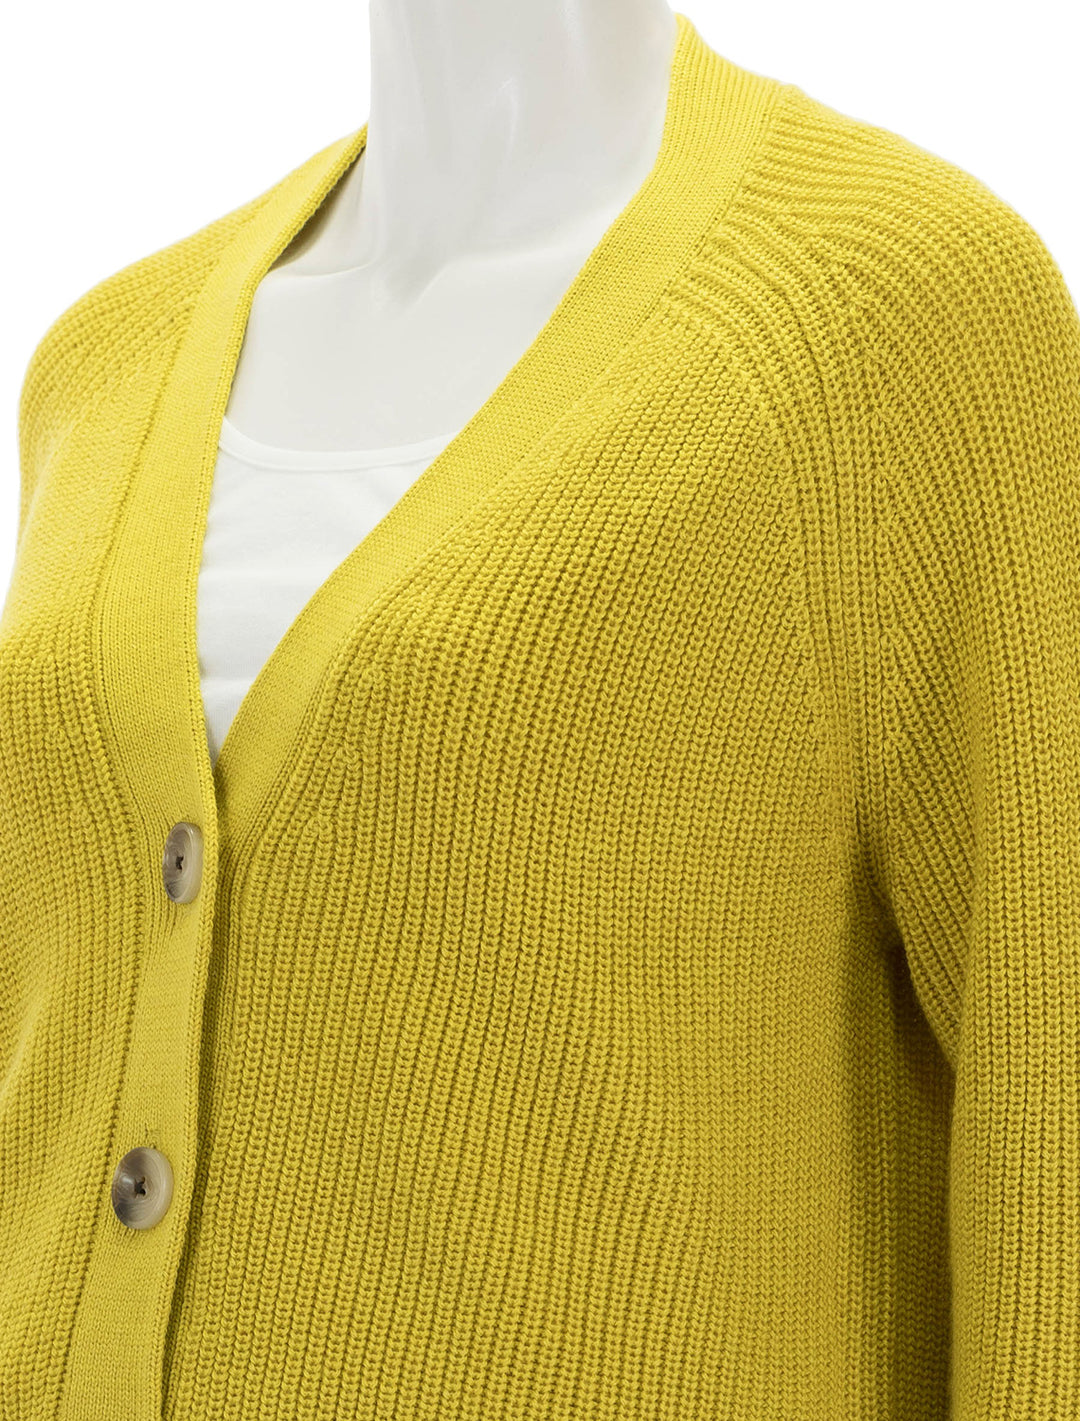 Close-up view of Velvet's Marilyn Cardigan in Sunflower.